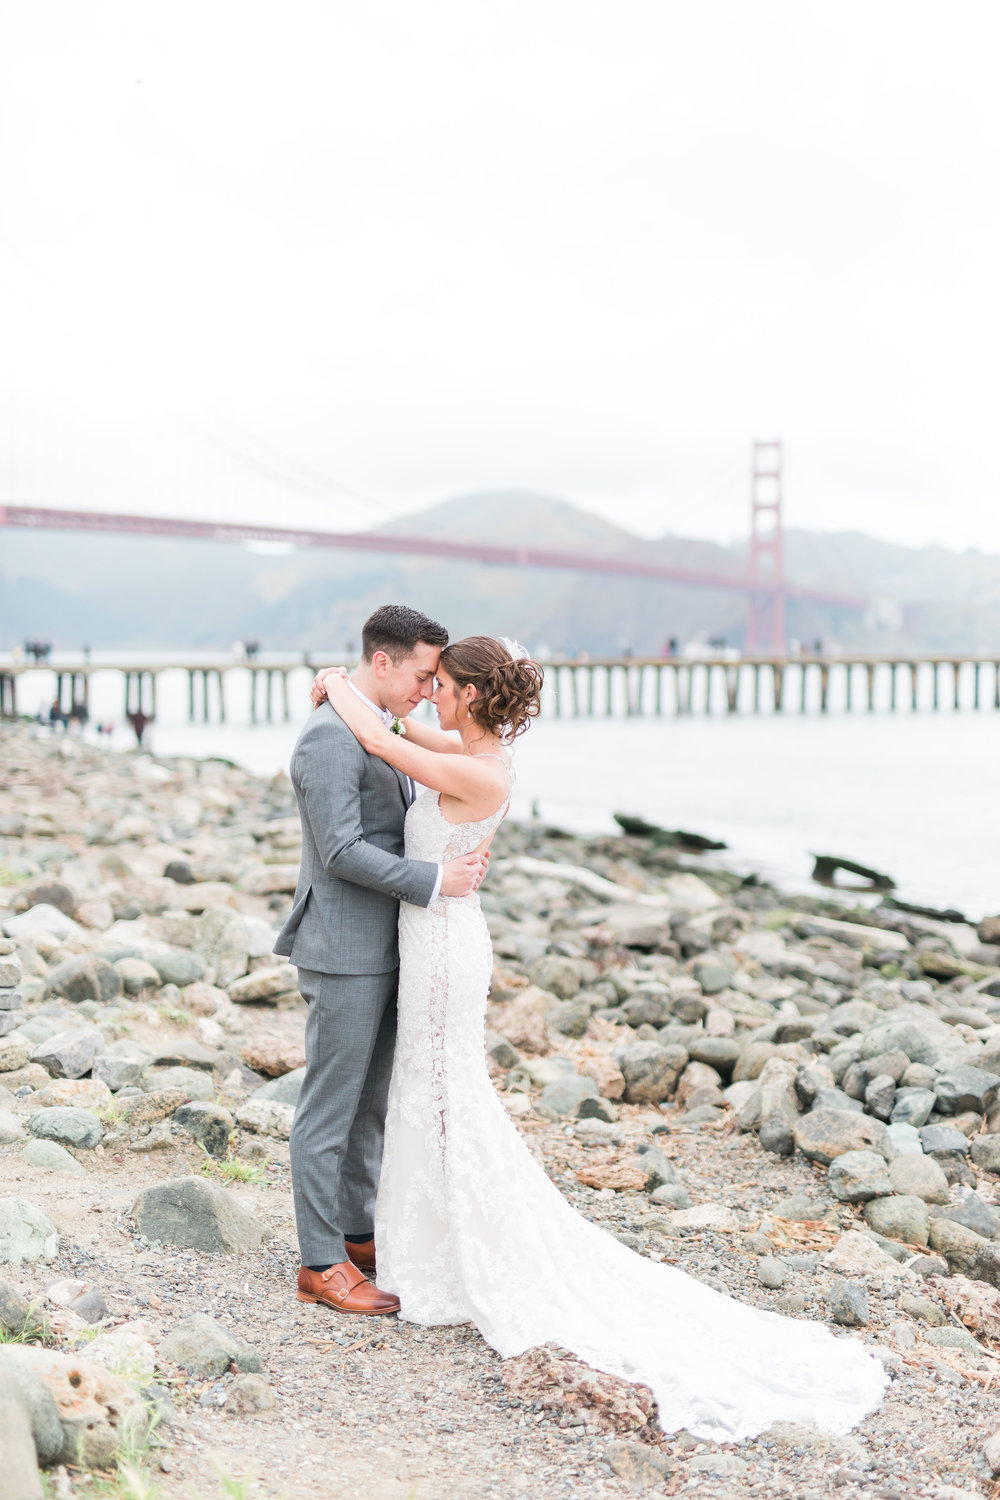 Best Engagement Photo Locations in SF - Crissy Field Engagement Photos by JBJ Pictures (18).jpg